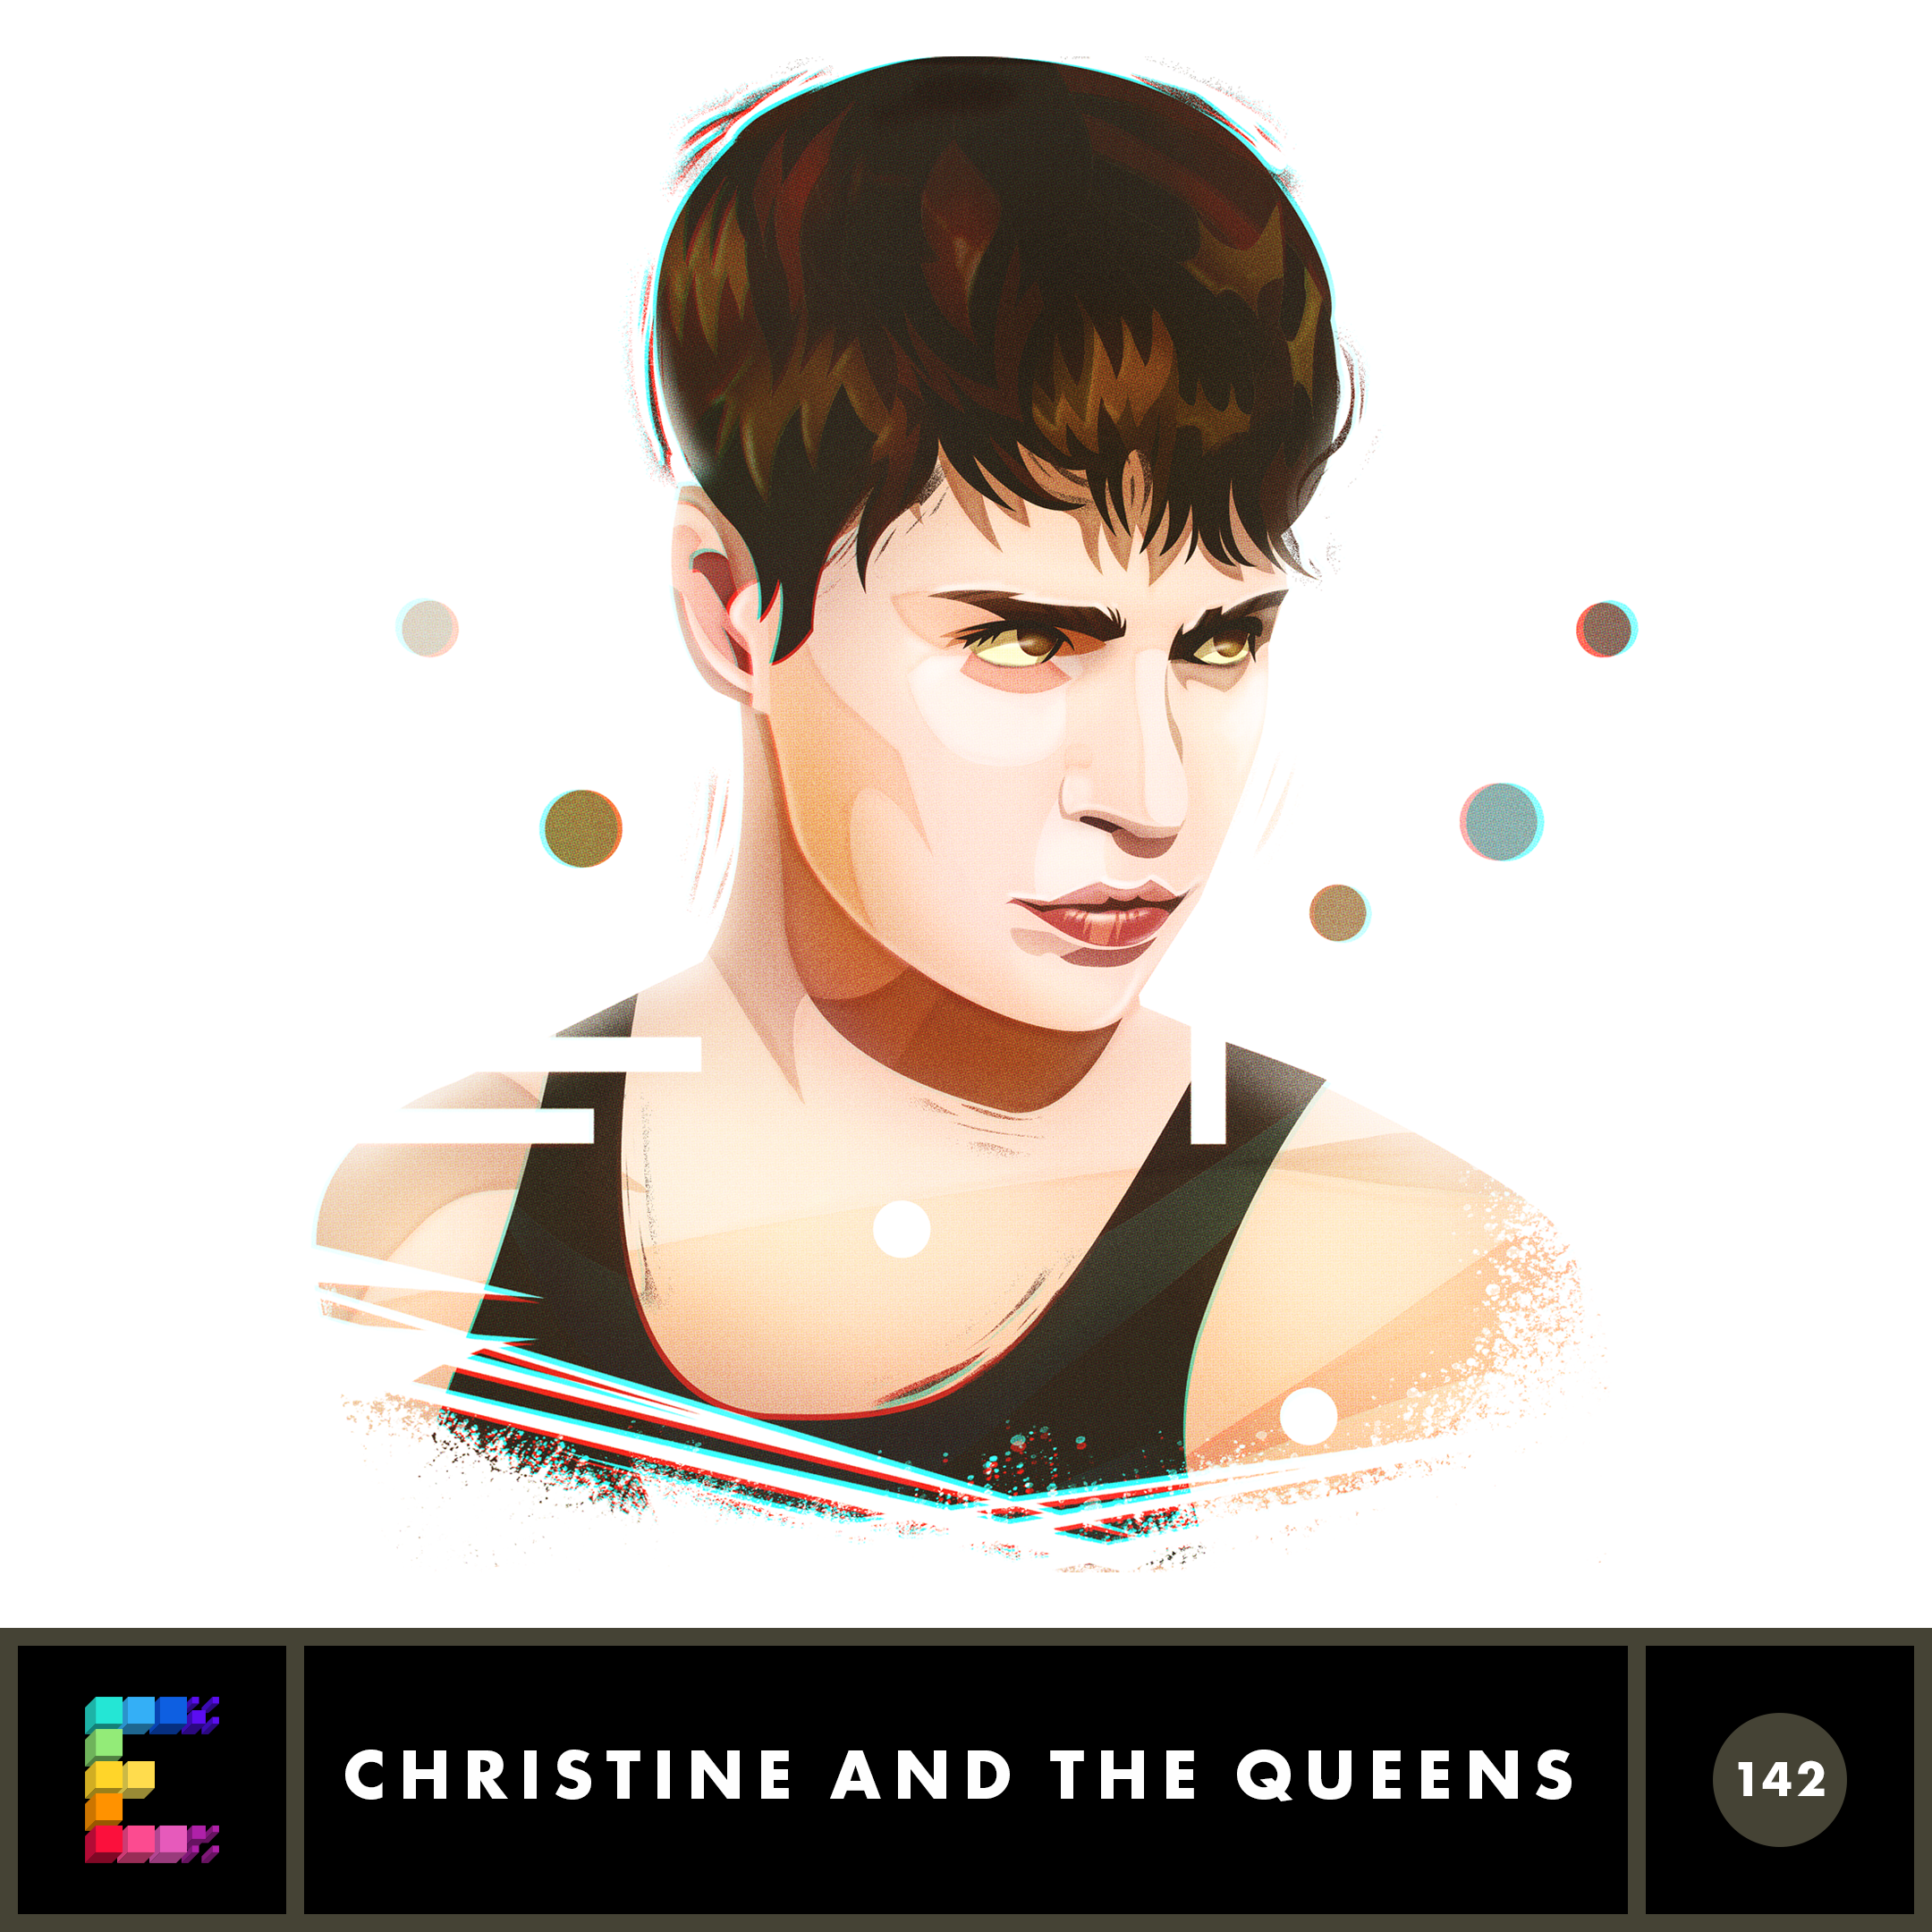 christine and the queens song download